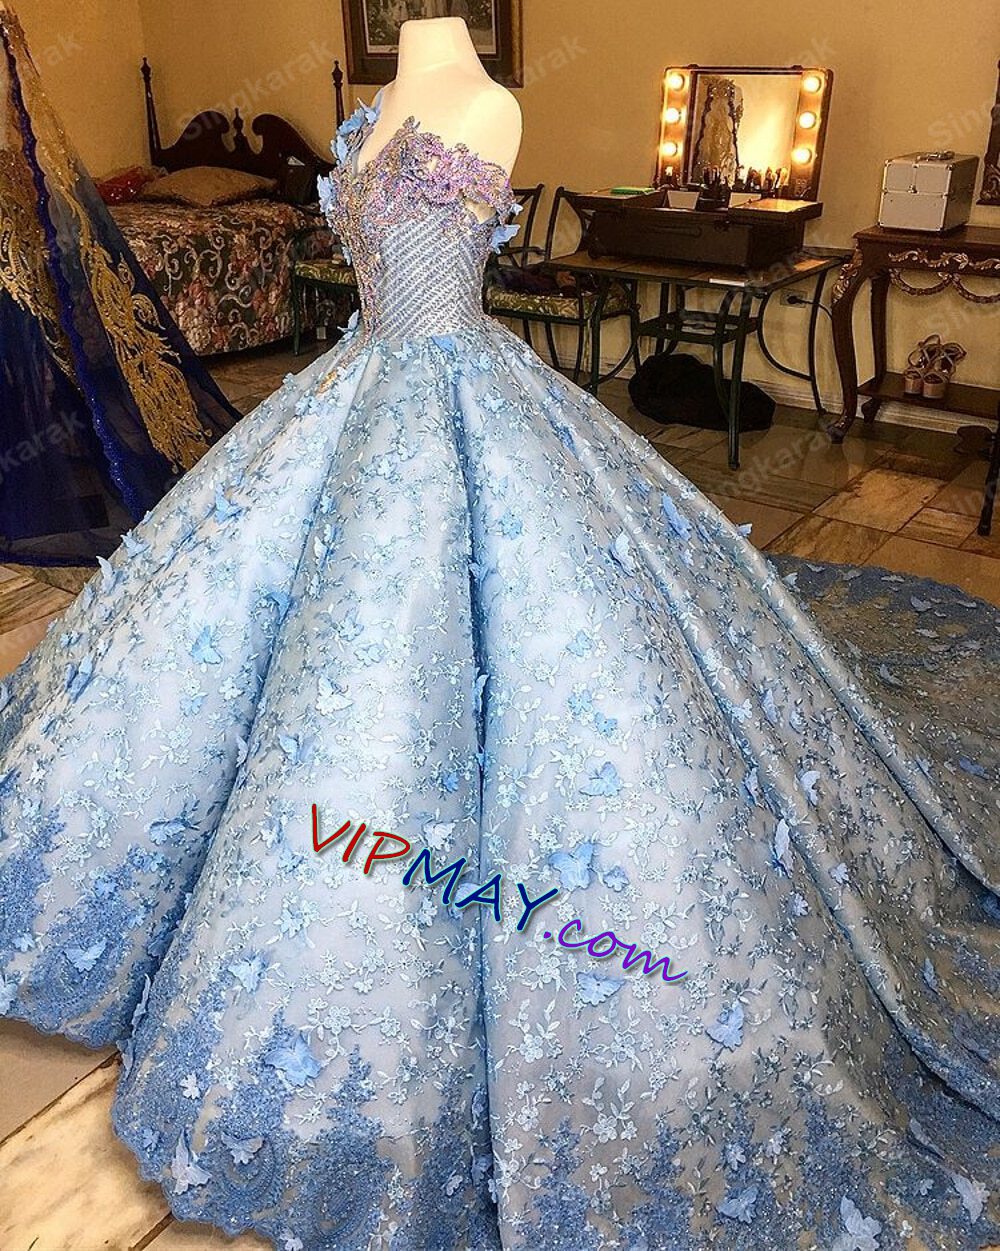 the most expensive quinceanera dress,most expensive quinceanera dress,butterfly quinceanera dress,quinceanera dress with butterflies,quinceanera dress lace puffy elegant,big skirt quinceanera dress,do quinceanera dress have trains,